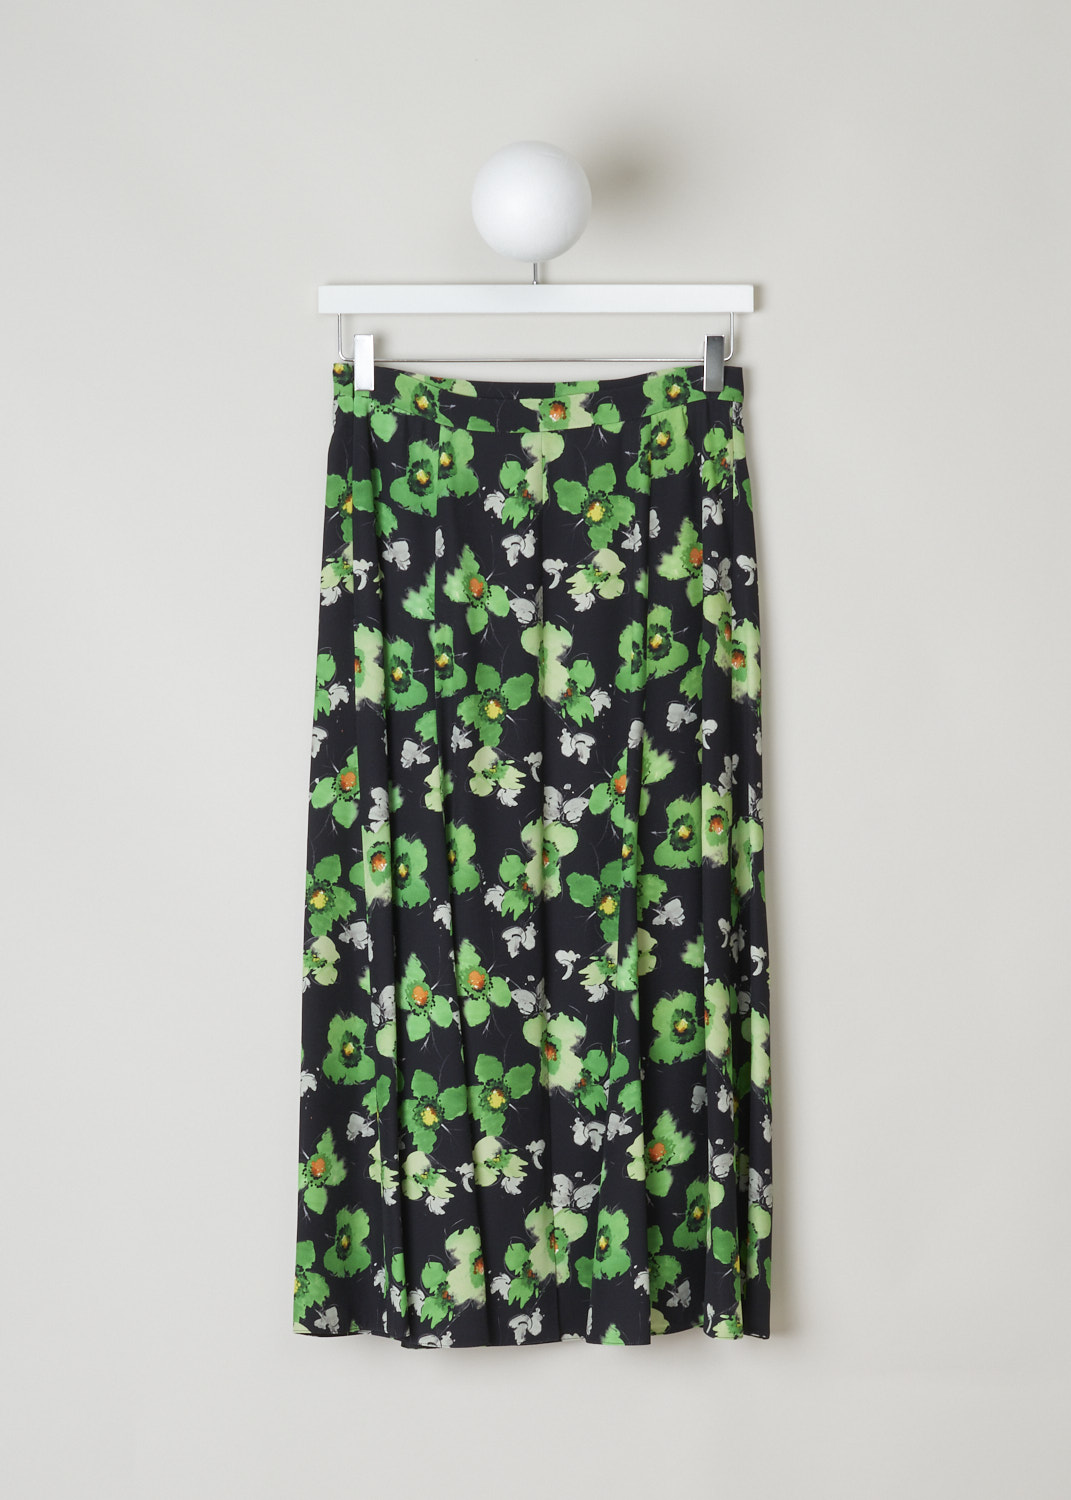 Prada, Black semi-circular skirt with green floral motif, sable_raso_narc_P152S_F077U_smeraldo, print, back, Starting from the top this mid-length skirt comes with a narrow waistband, with the fastening option being on the left side. The seams coming of the waistband are ruched and adds more excitement to this model. Furthermore, this model does flare out, and has a short split on the back.